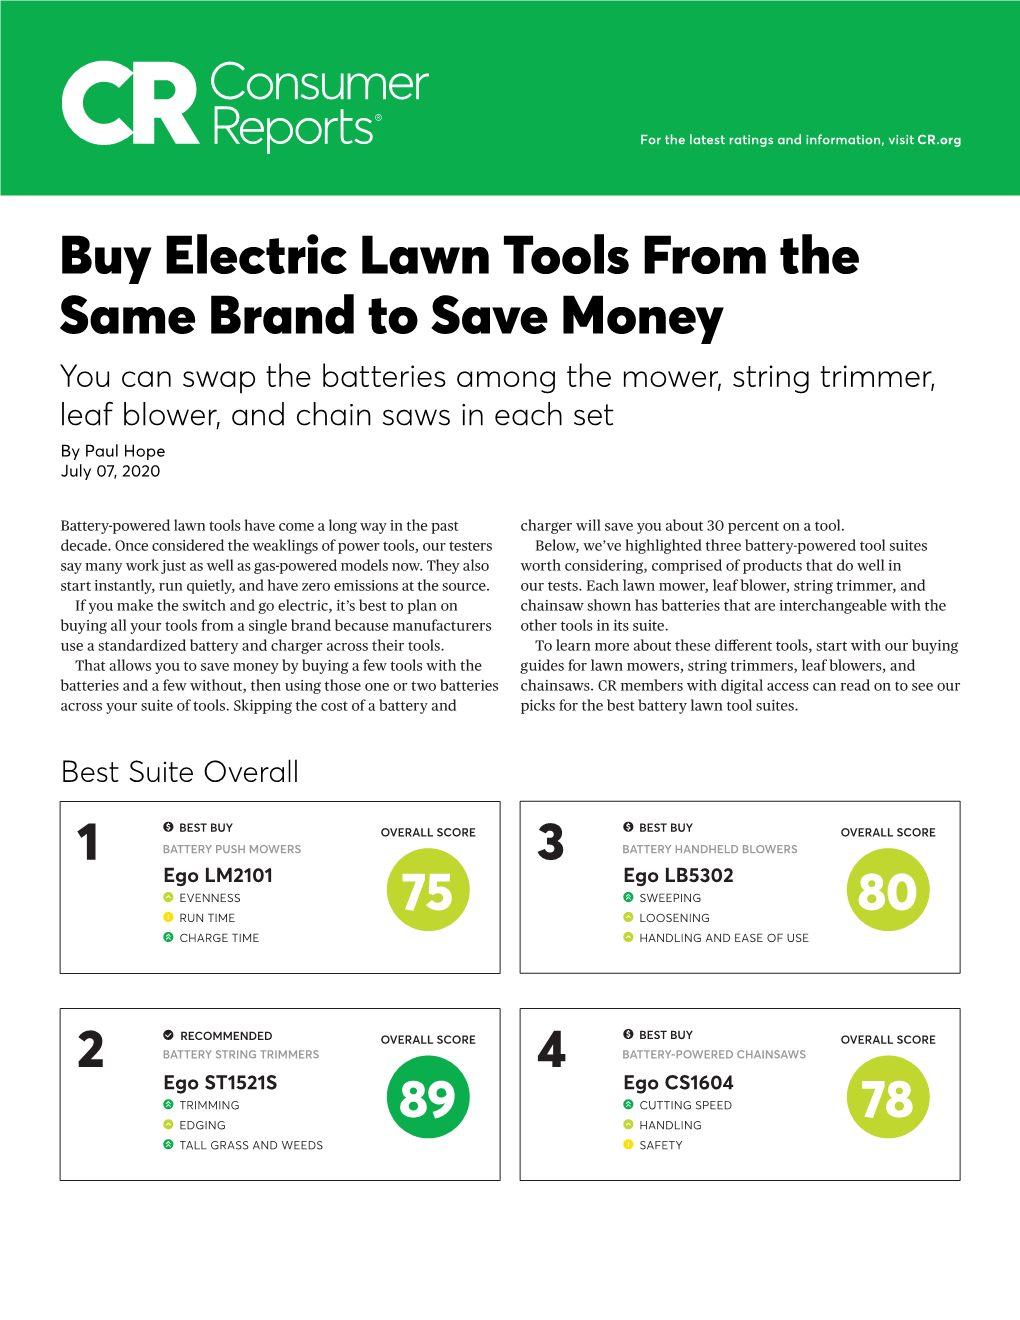 Buy Electric Lawn Tools from the Same Brand to Save Money